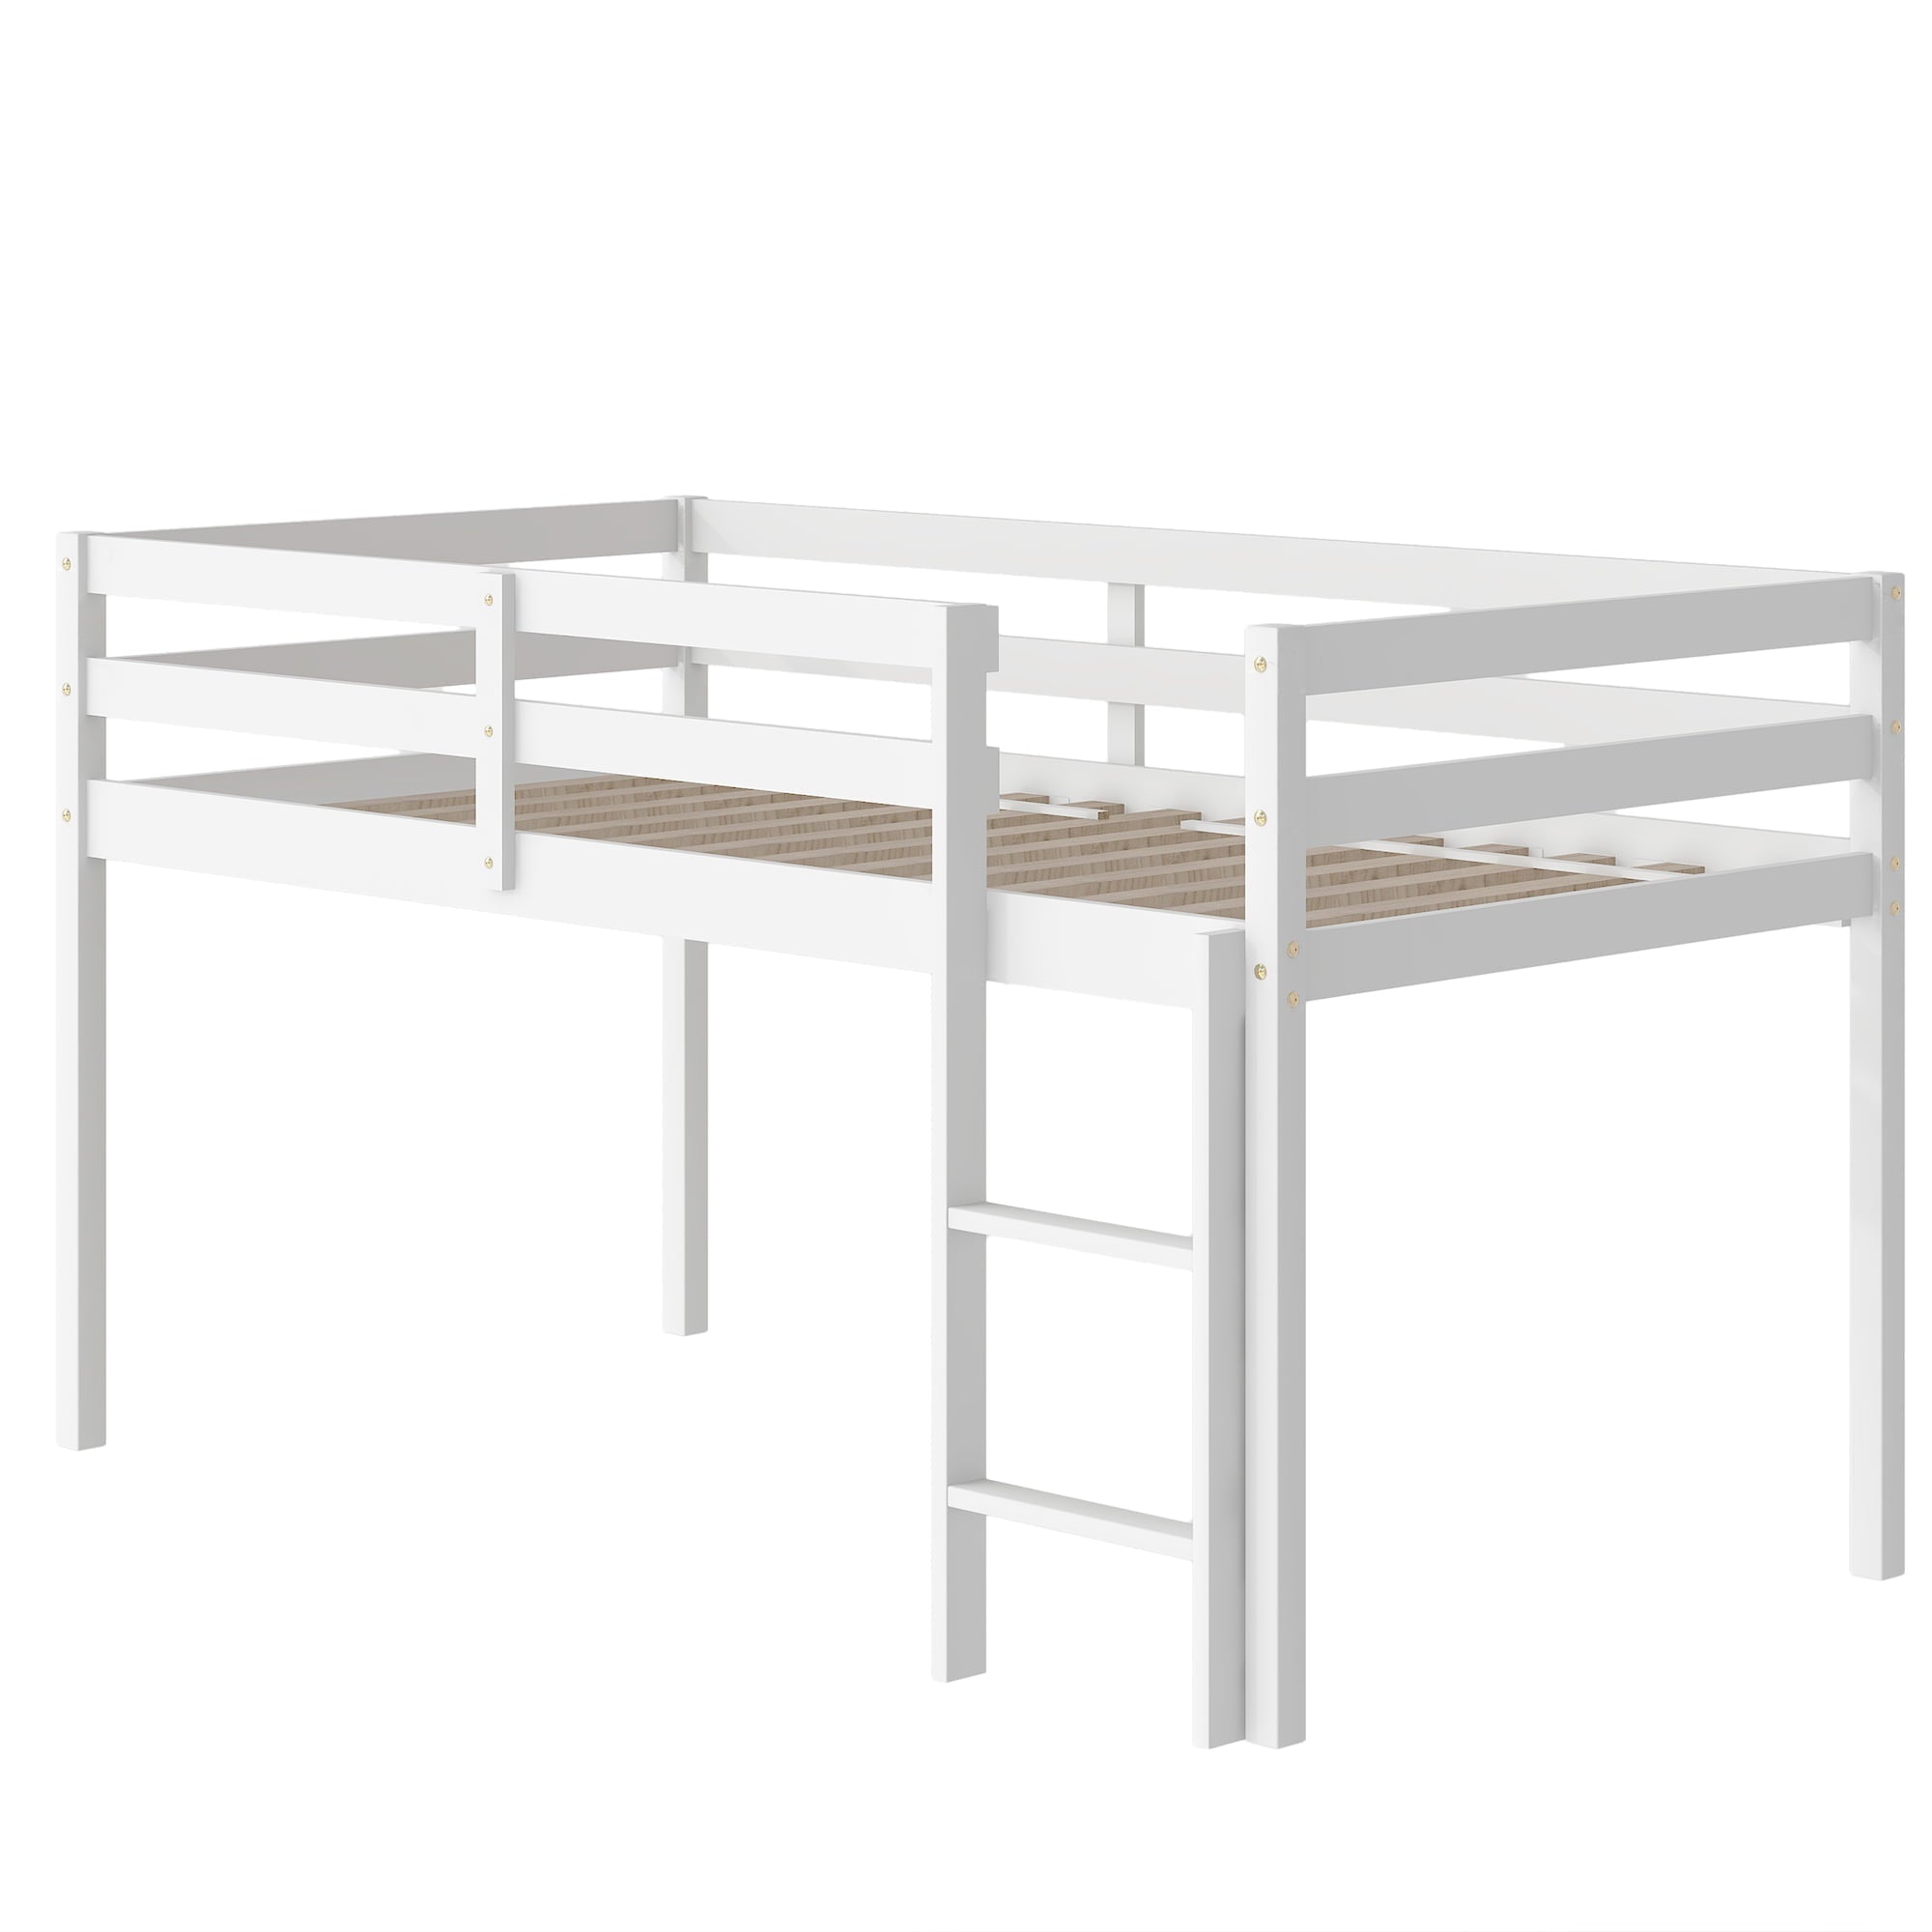 Twin Wood Loft Bed with Full-length Safety Rail and Ladder, Modern Loft Bed Frame for Kids Teens Adult, Space Saving Bedroom Low Loft Bed, No Box Spring Needed, White, J2309